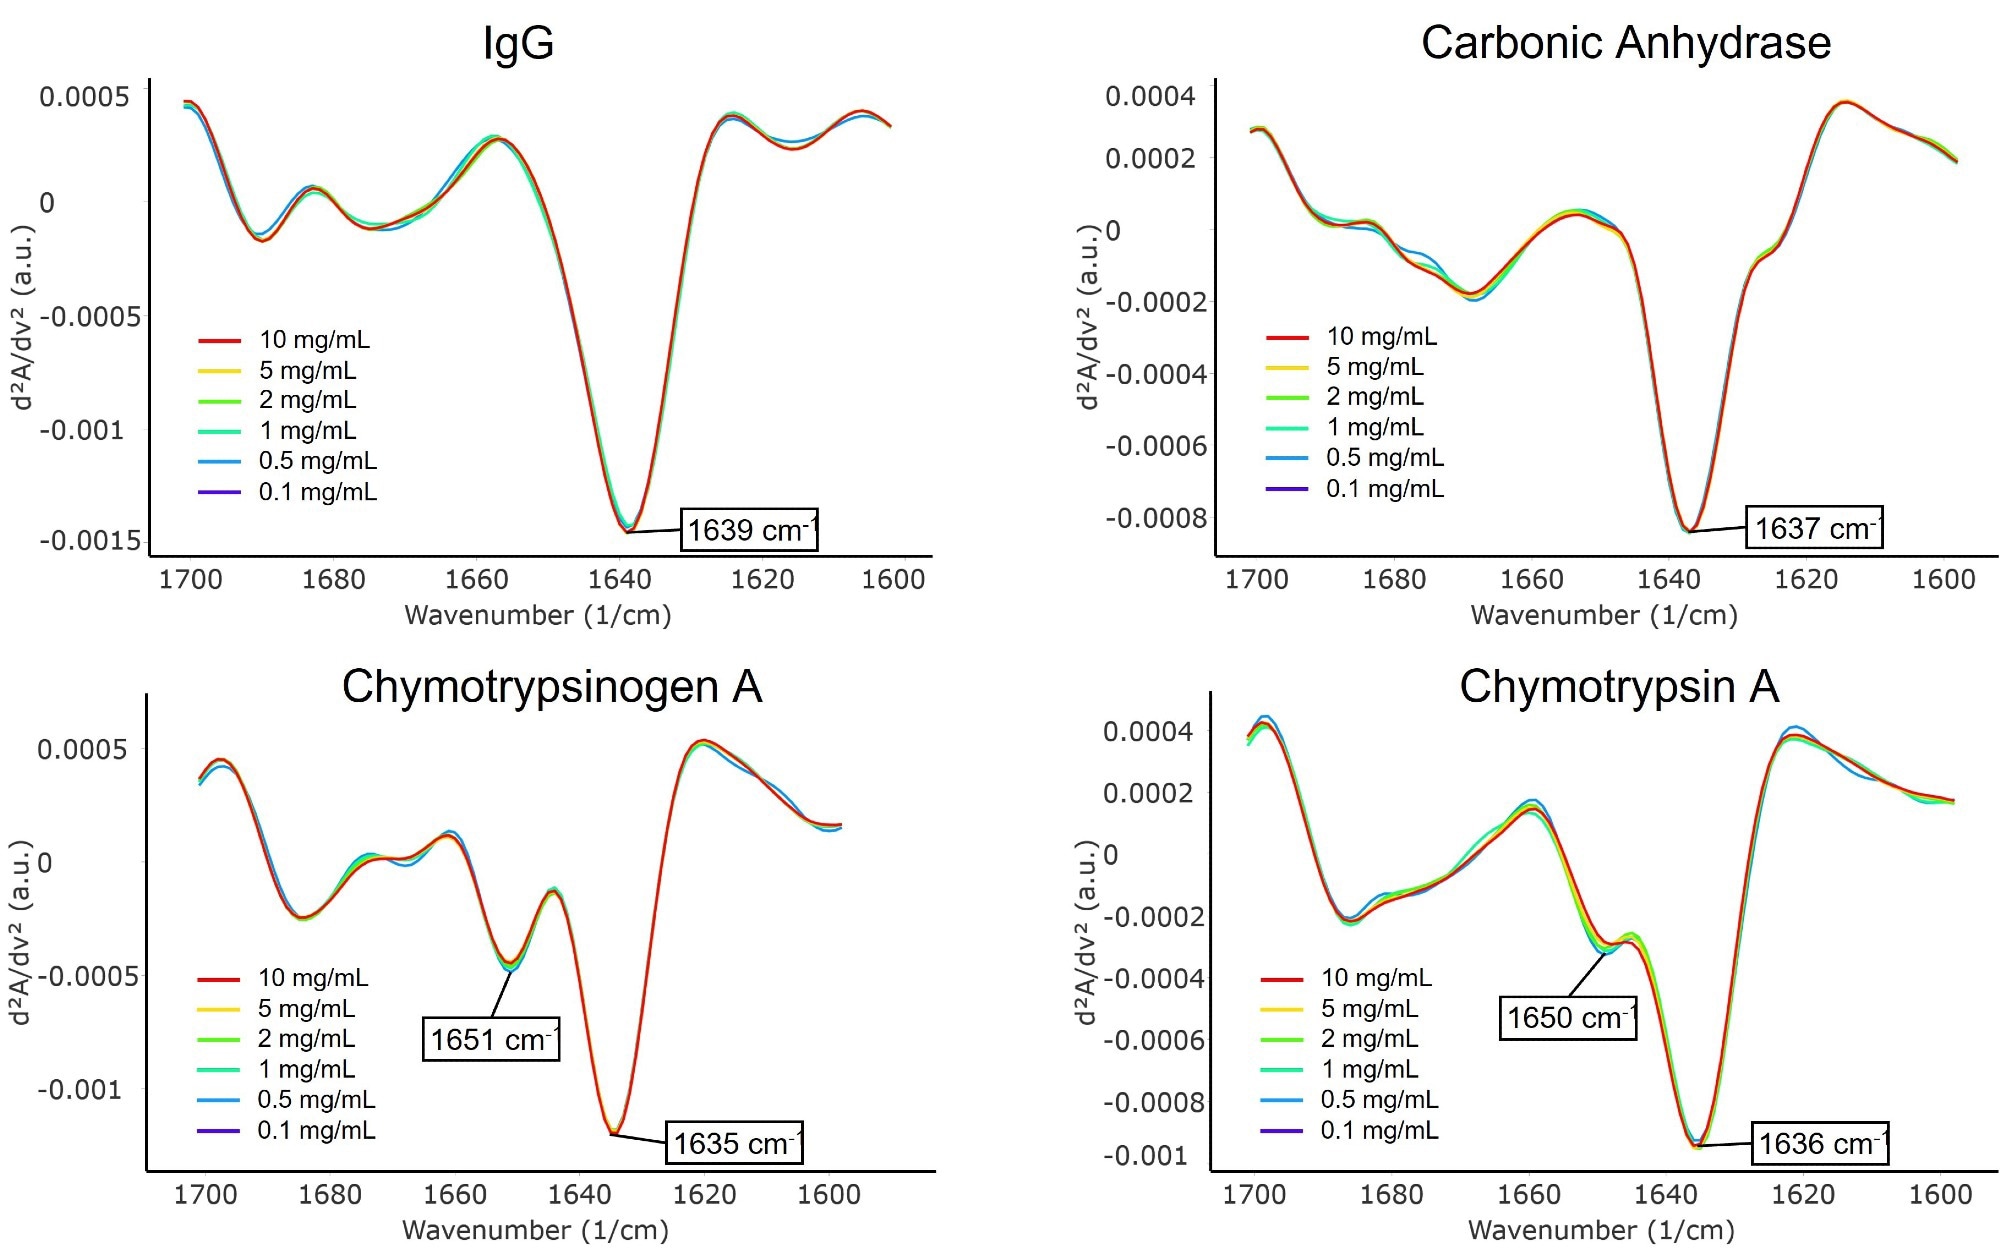 Second derivative spectra of β-sheet-rich proteins: IgG, carbonic anhydrase, chymotrypsinogen A, and chymotrypsin A.